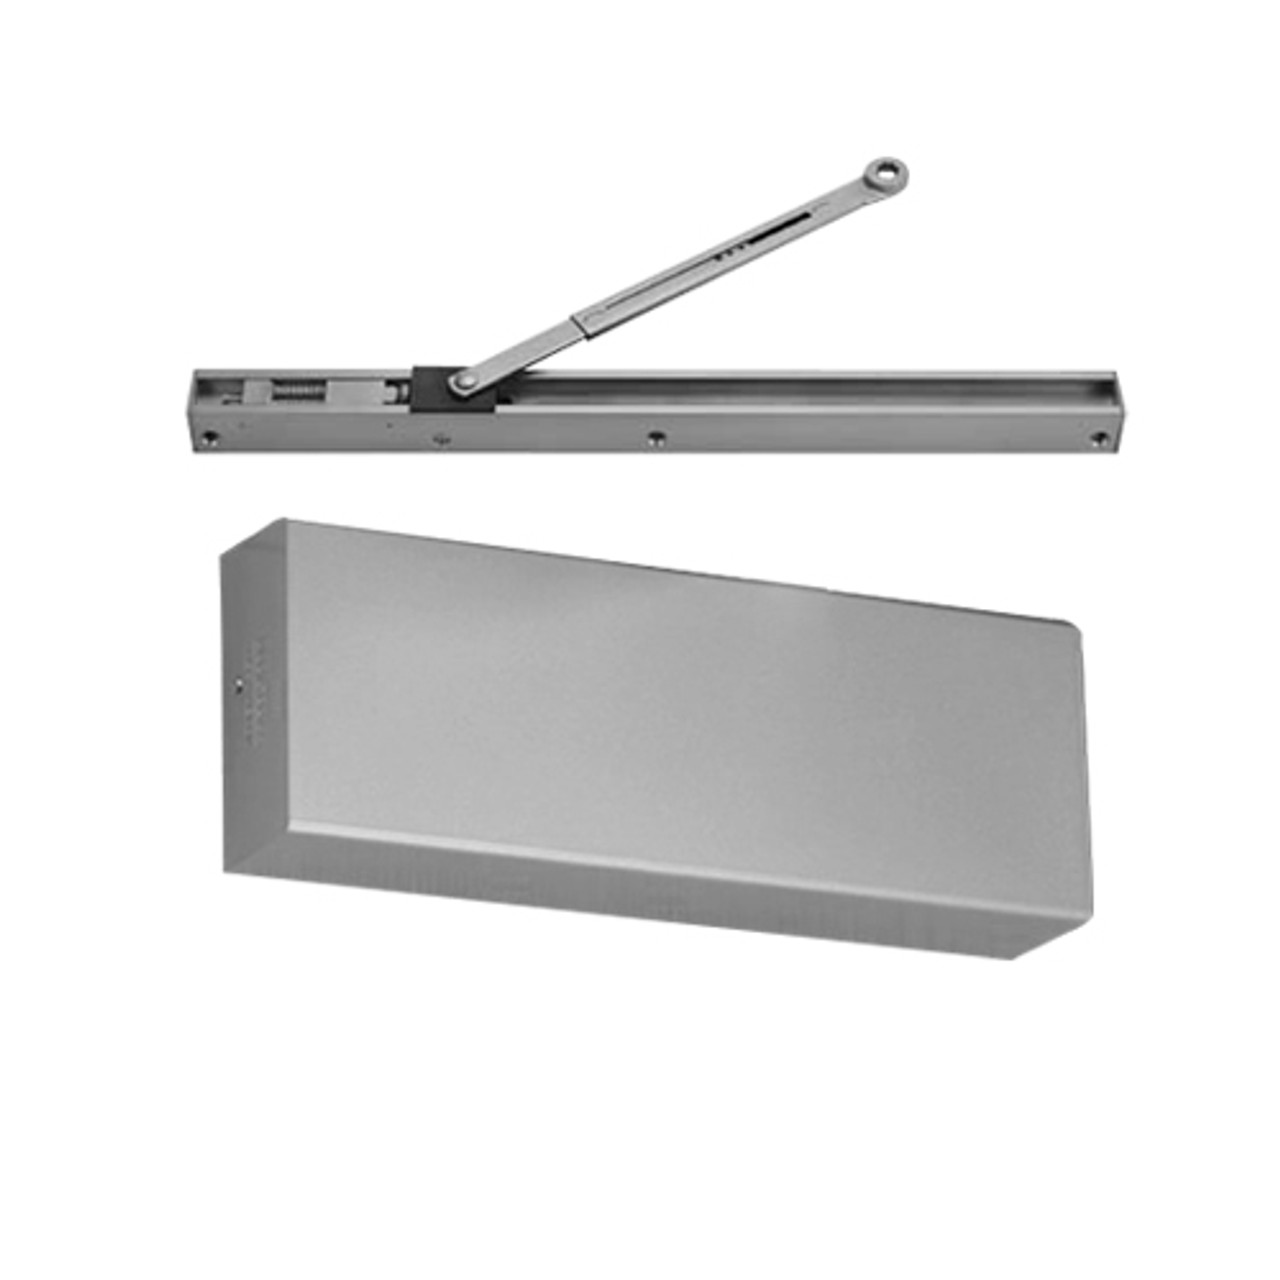 9500STH-689 Norton 9500 Series Hold Open Cast Iron Door Closer with Pull Side Slide Track in Aluminum Finish